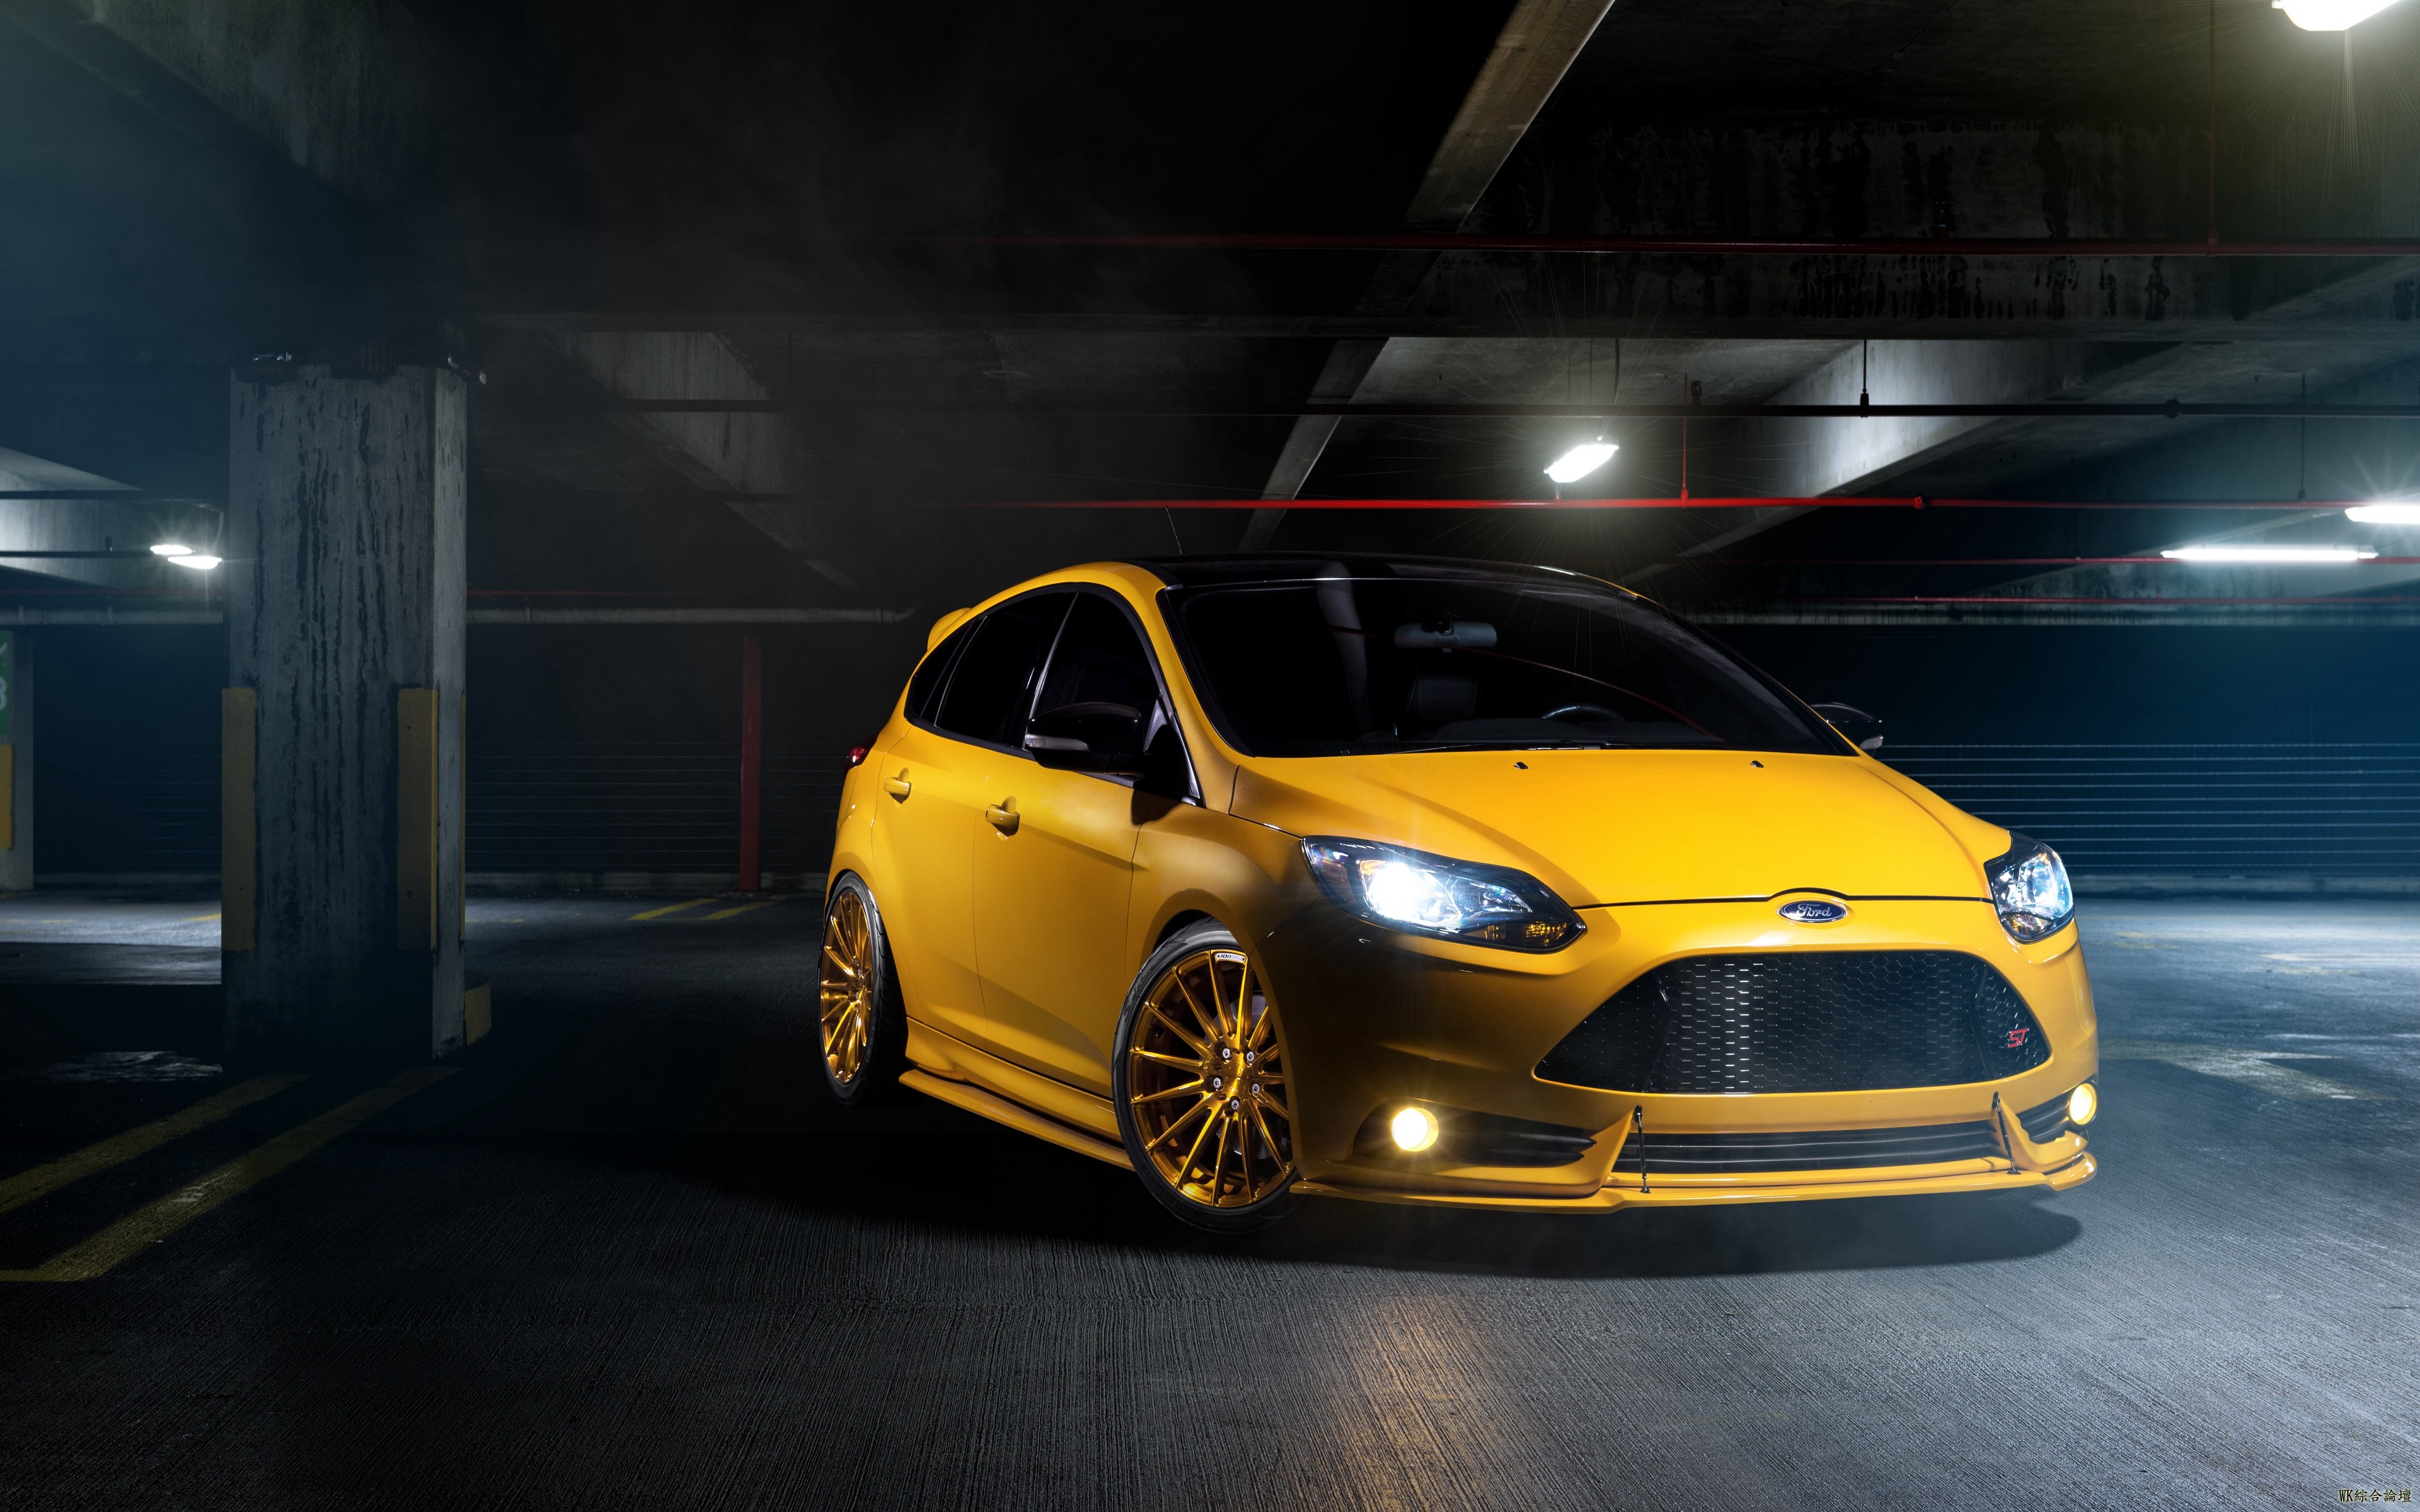 focus_ford_front_view_yellow_cars_97118_3840x2400.jpg